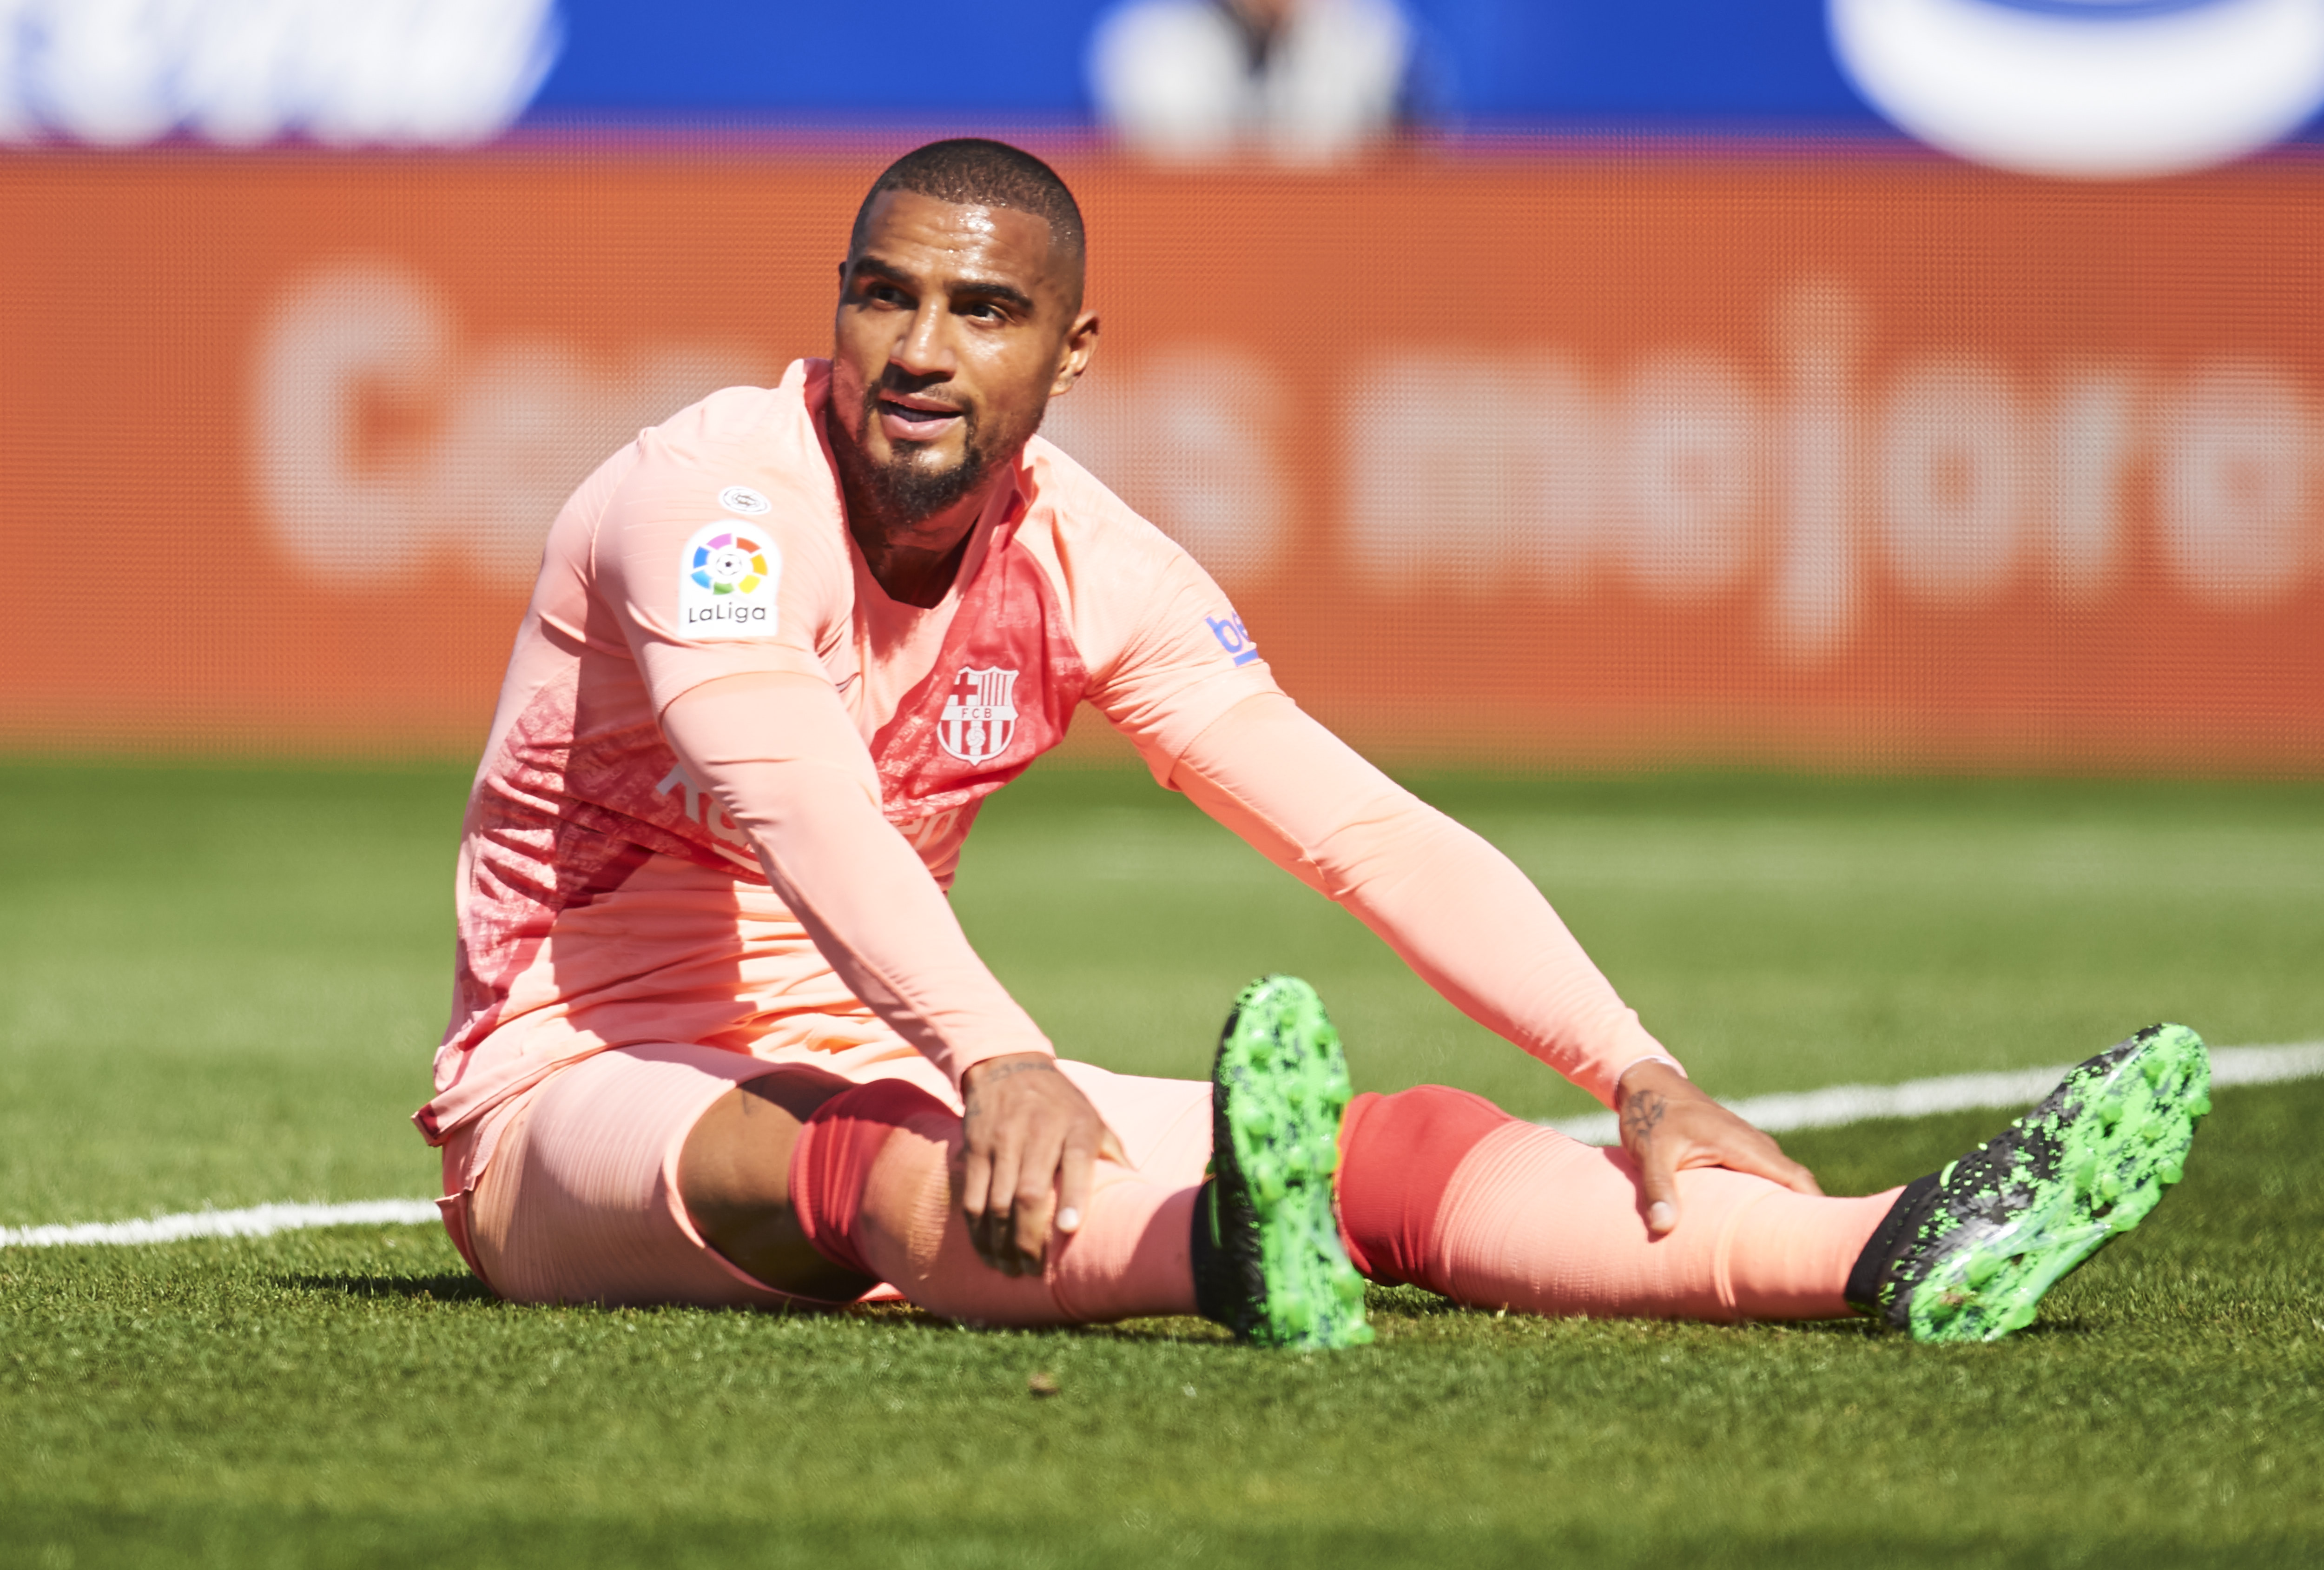 Forgettable outing for Boateng (Photo by Juan Manuel Serrano Arce/Getty Images)